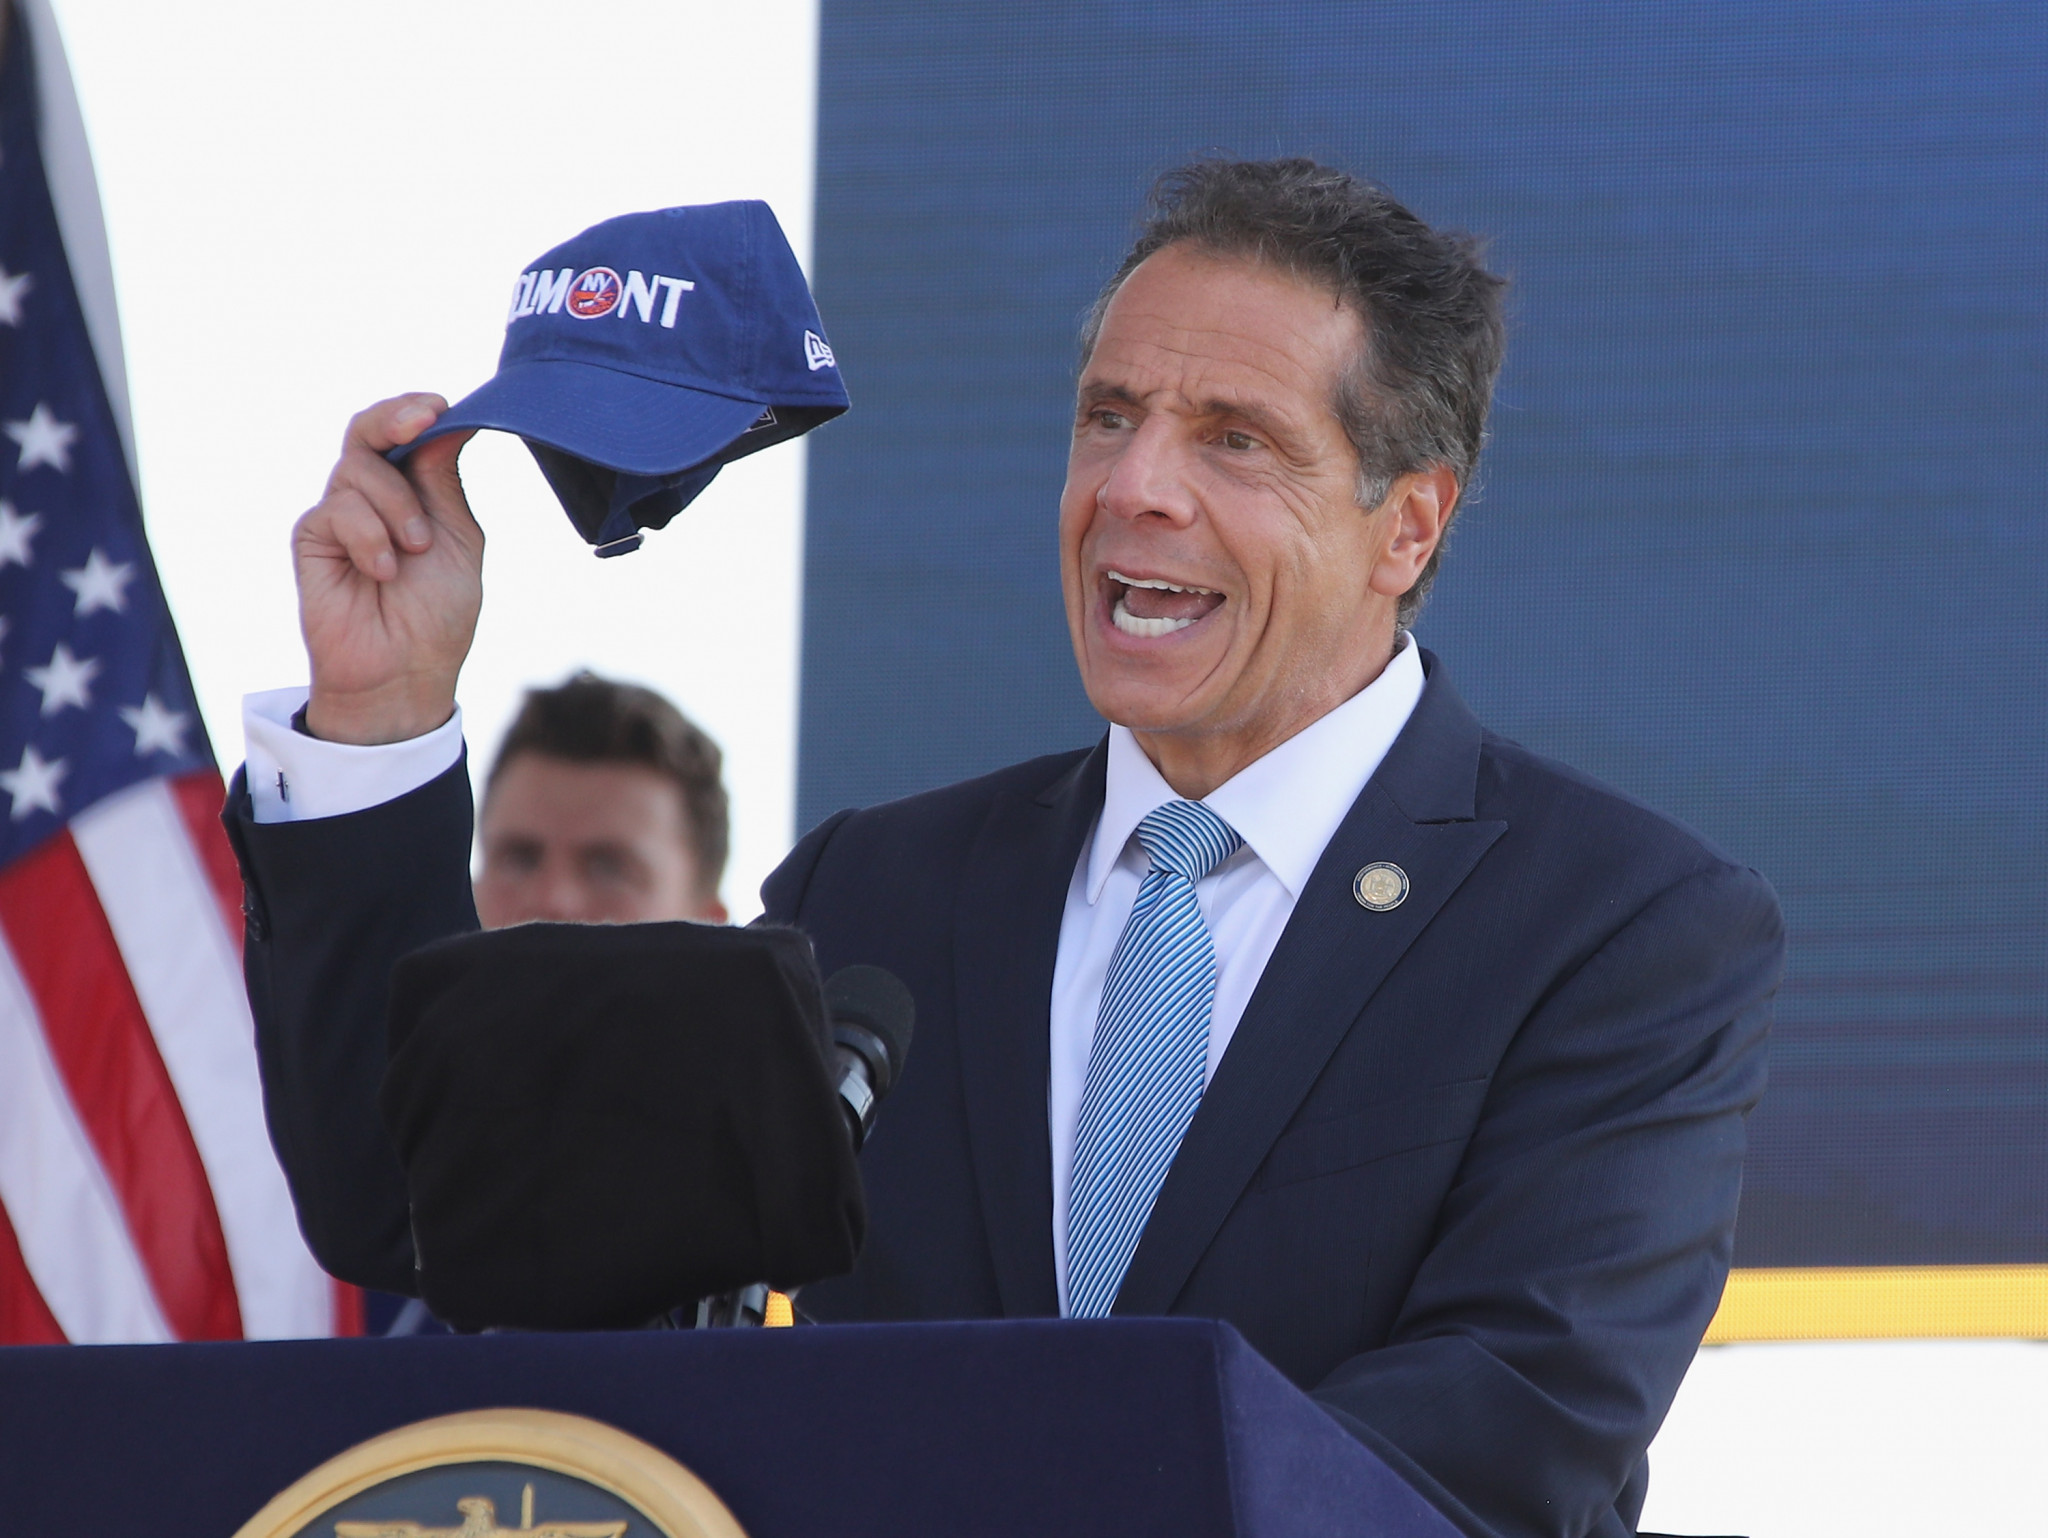 Andrew Cuomo announced the dates of the Winter Universiade ©Getty Images